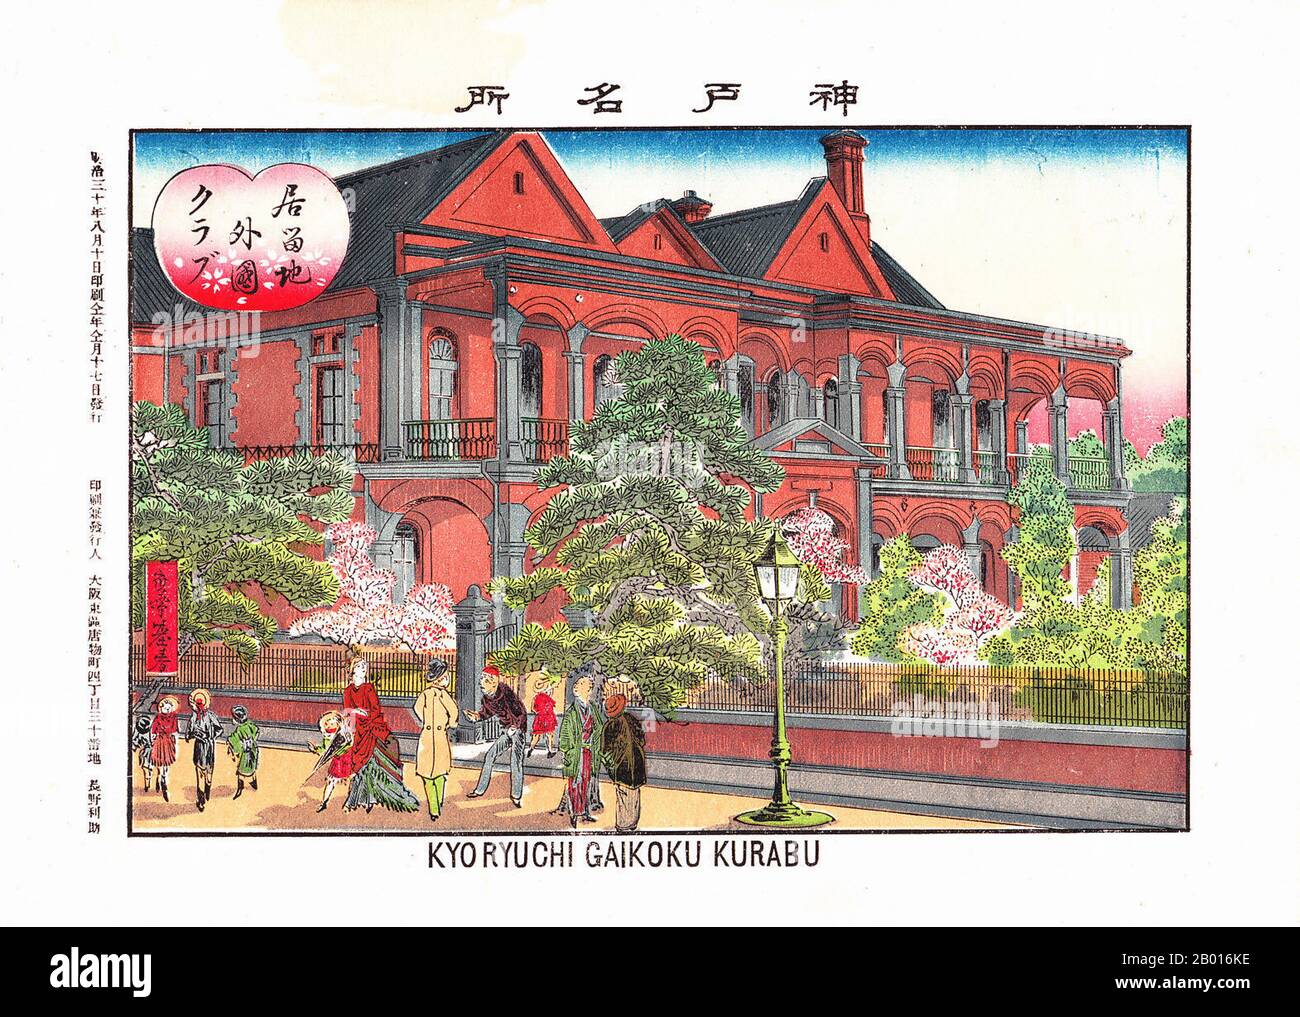 Japan: 'Foreigners Club in Kobe'. Ukiyo-e woodblock print, 1897.  Kobe is the sixth-largest city in Japan and the capital city of Hyōgo Prefecture on the southern side of the main island of Honshū, approximately 500 km west of Tokyo. Kobe is a prominent port city with a population of about 1.5 million. The city is located in the Kansai region of Japan and is part of the Keihanshin metropolitan area along with Osaka and Kyoto. Keihanshin in turn is part of the Taiheiyō Belt, a megalopolis. Kobe was one of the cities to open for trade with the West following the end of the policy of seclusion. Stock Photo